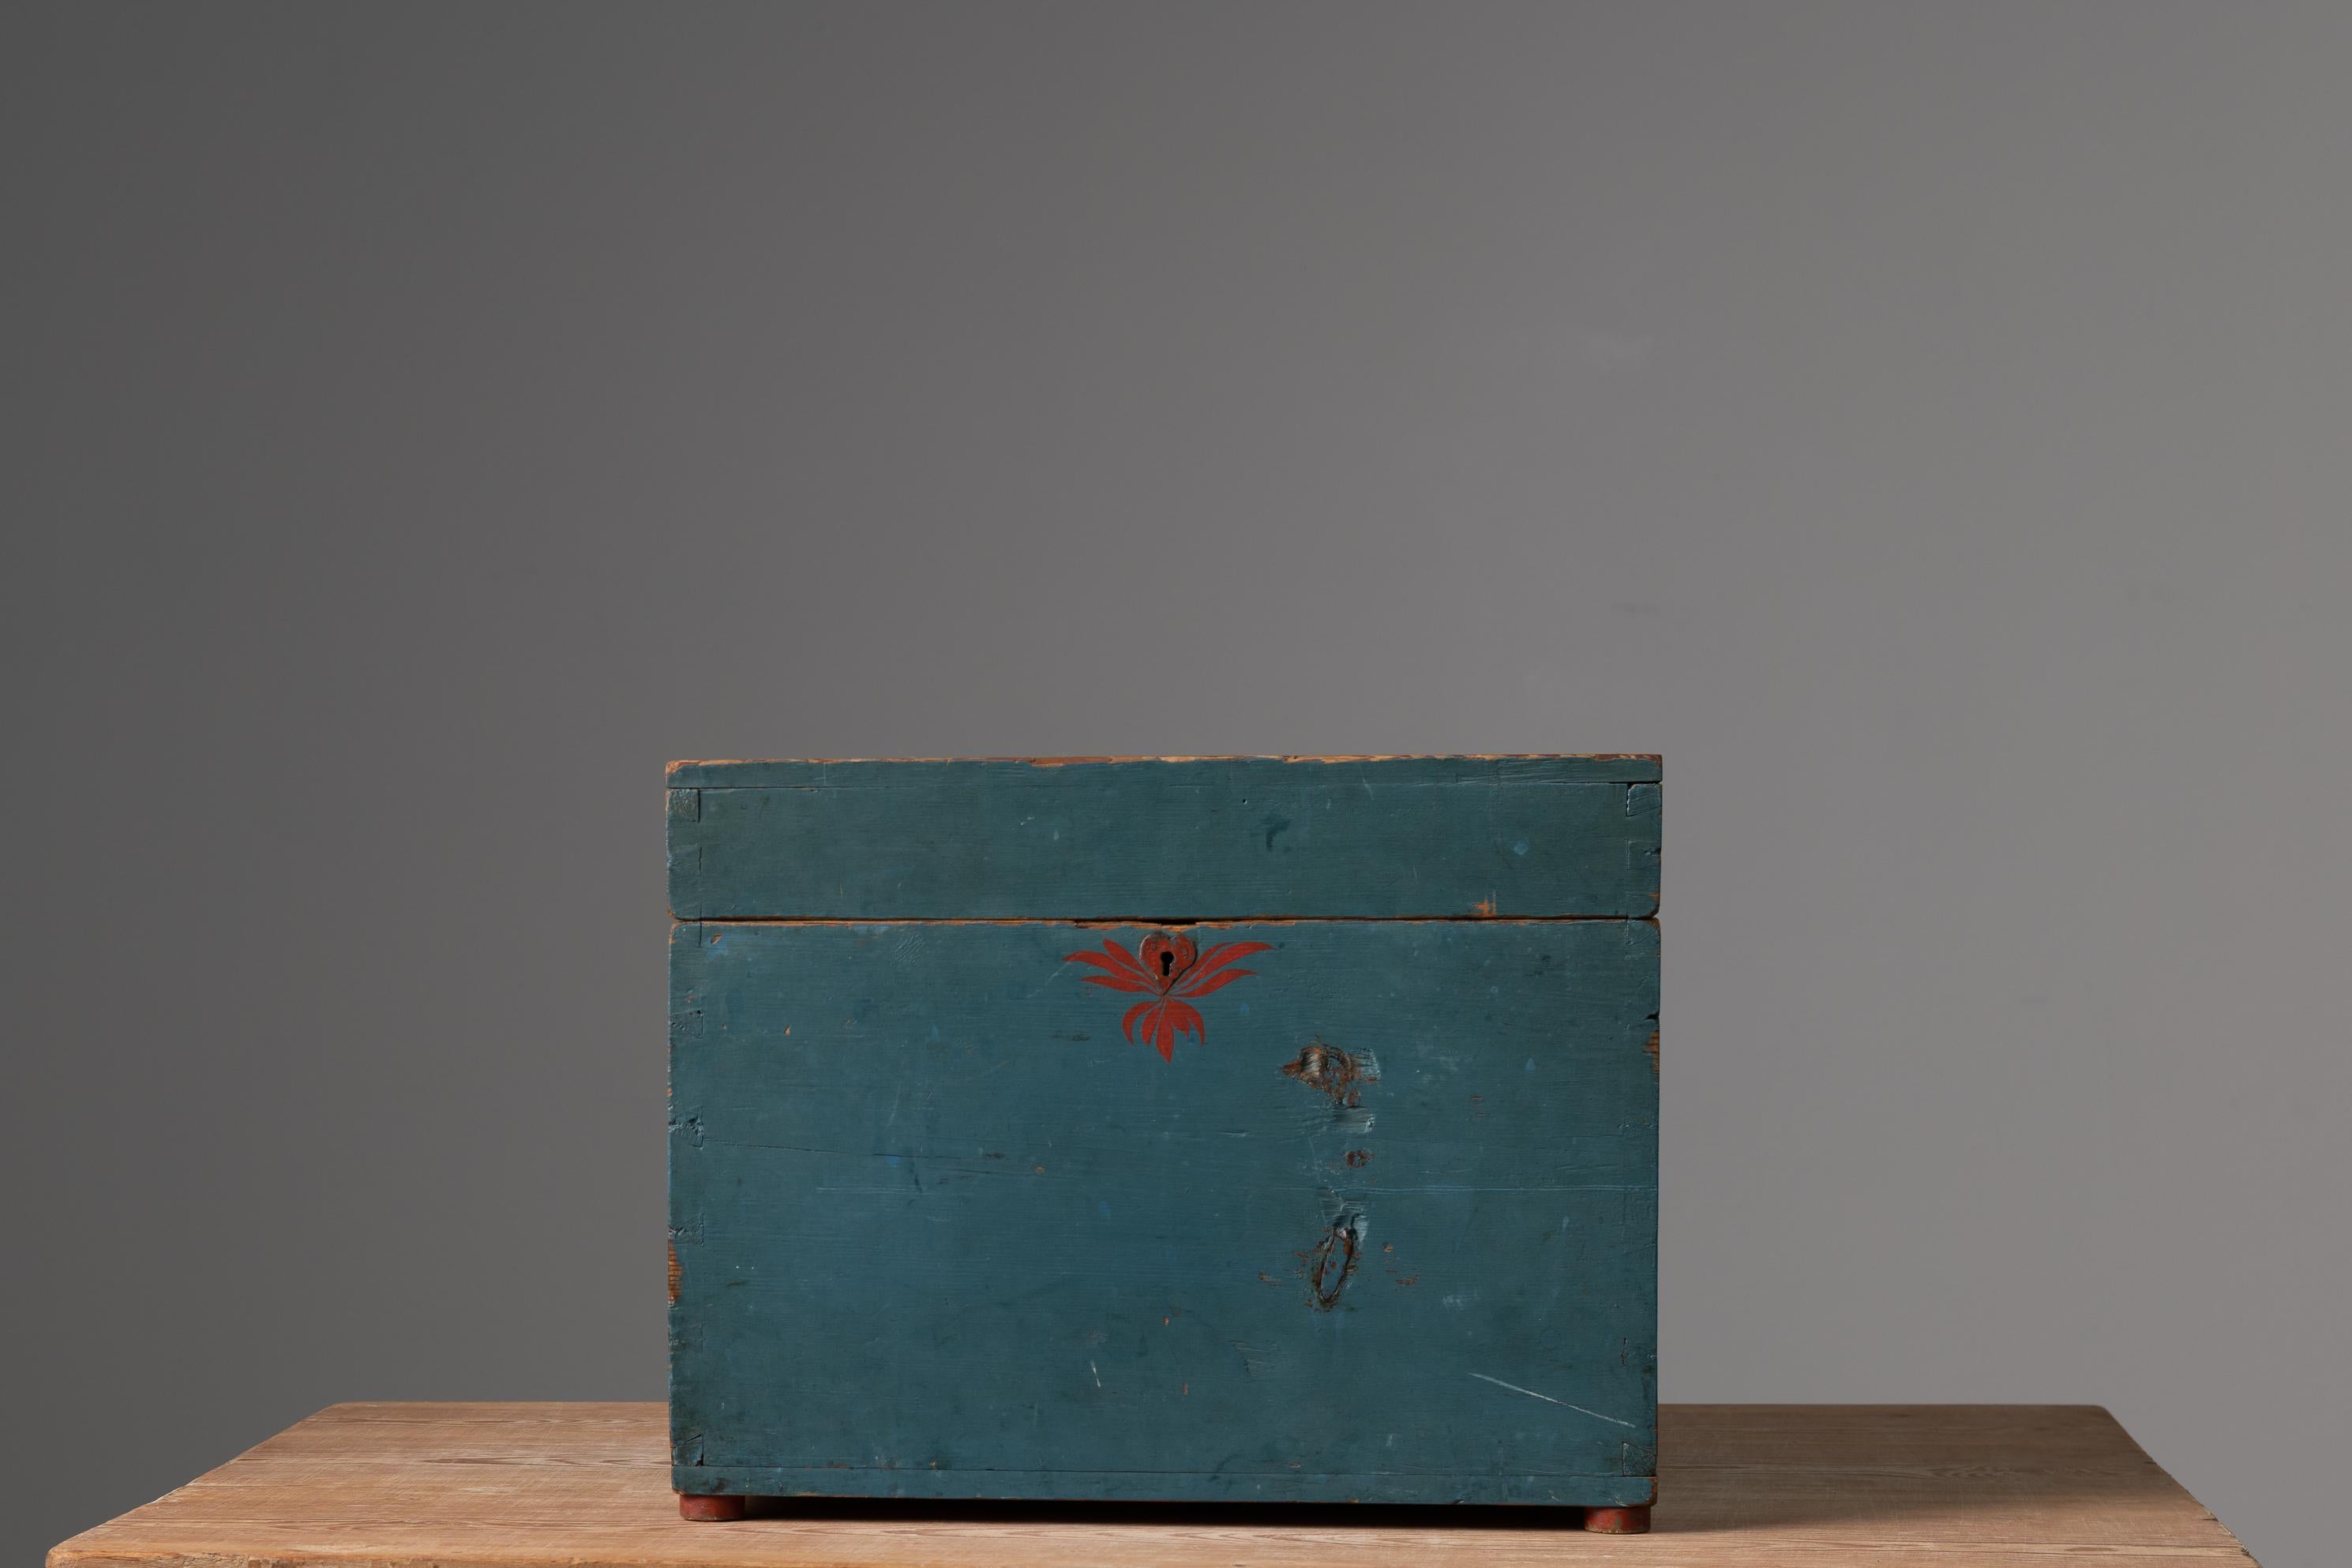 Northern Swedish blue pine box from Hälsingland in northern Sweden. The box is from the 19th century and likely from the village Norrala. The box was likely a friargåva, a gift given from a man to the woman he was courting. This box has a dating,